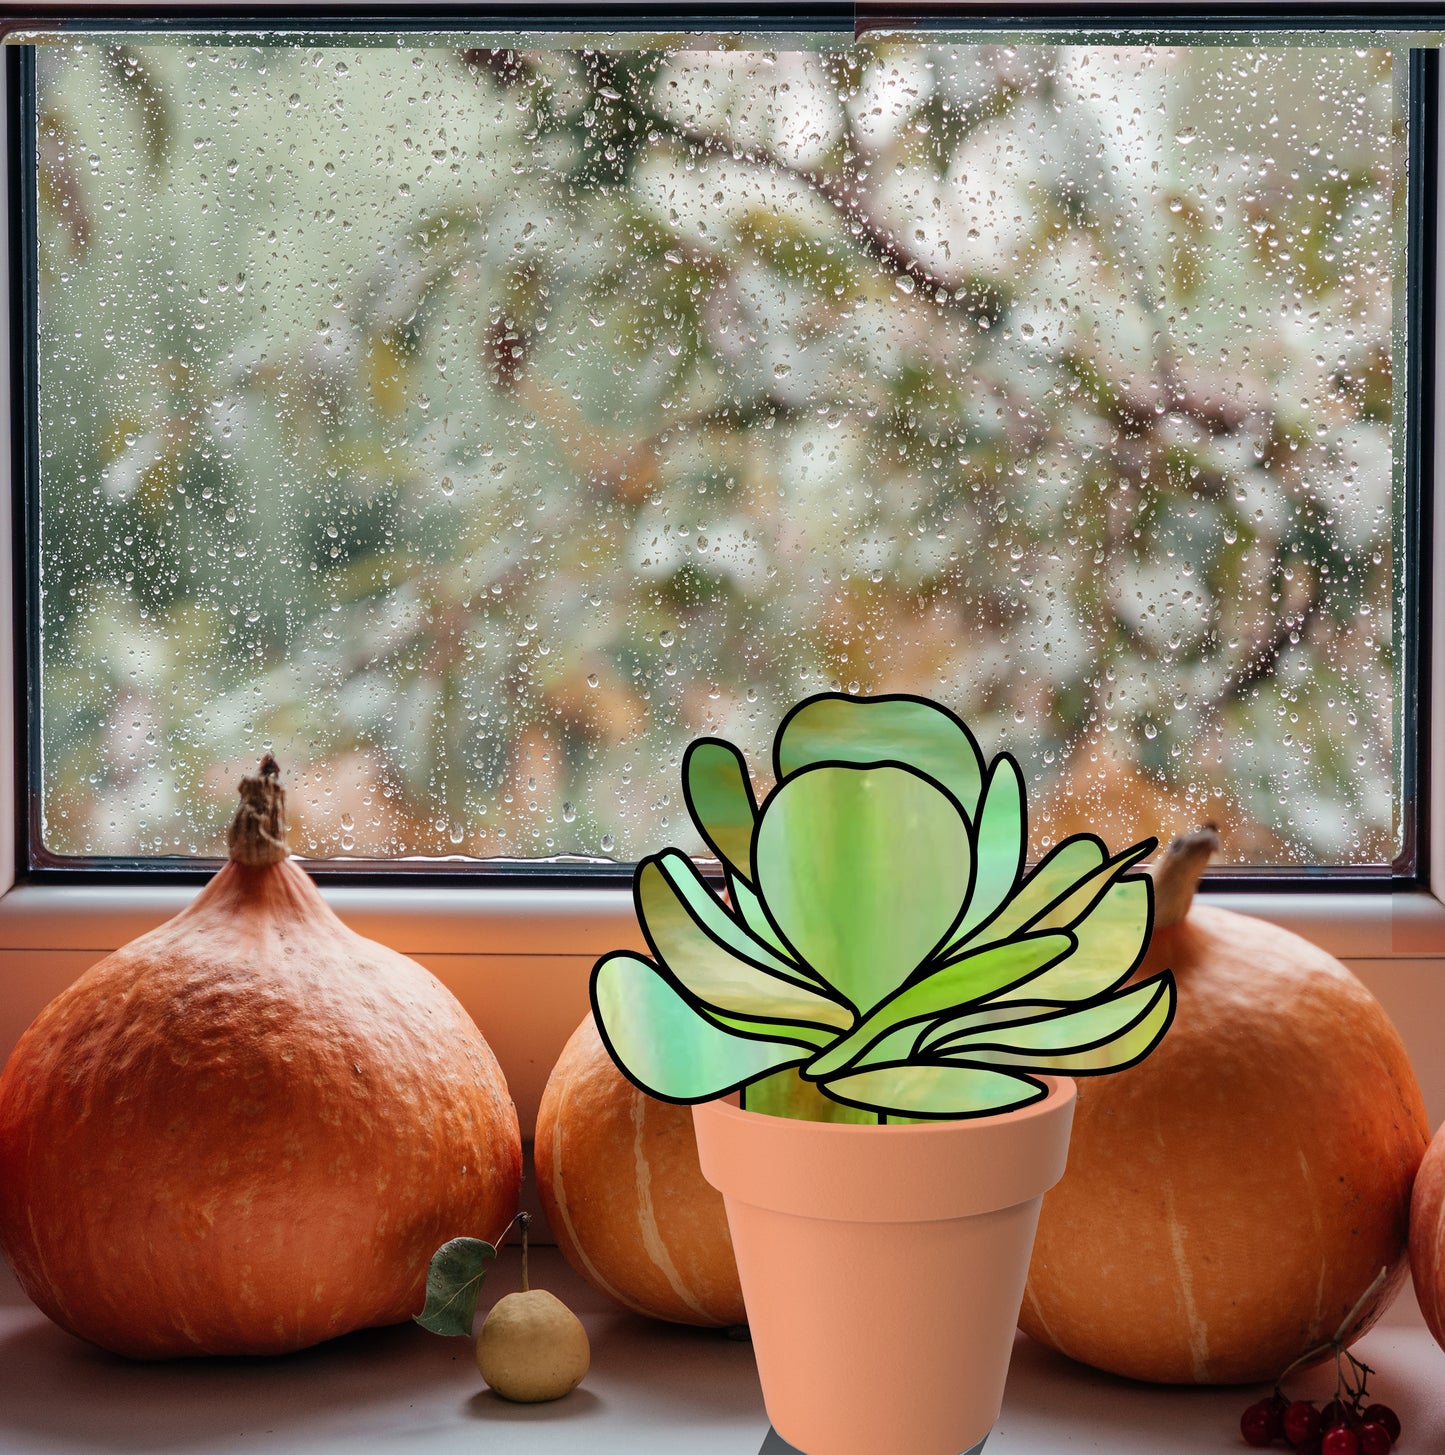 Original stained glass pattern for a kalanchoe "paddle plant" succulent plant stem agave, instant PDF download, shown on windowsill with pumpkins